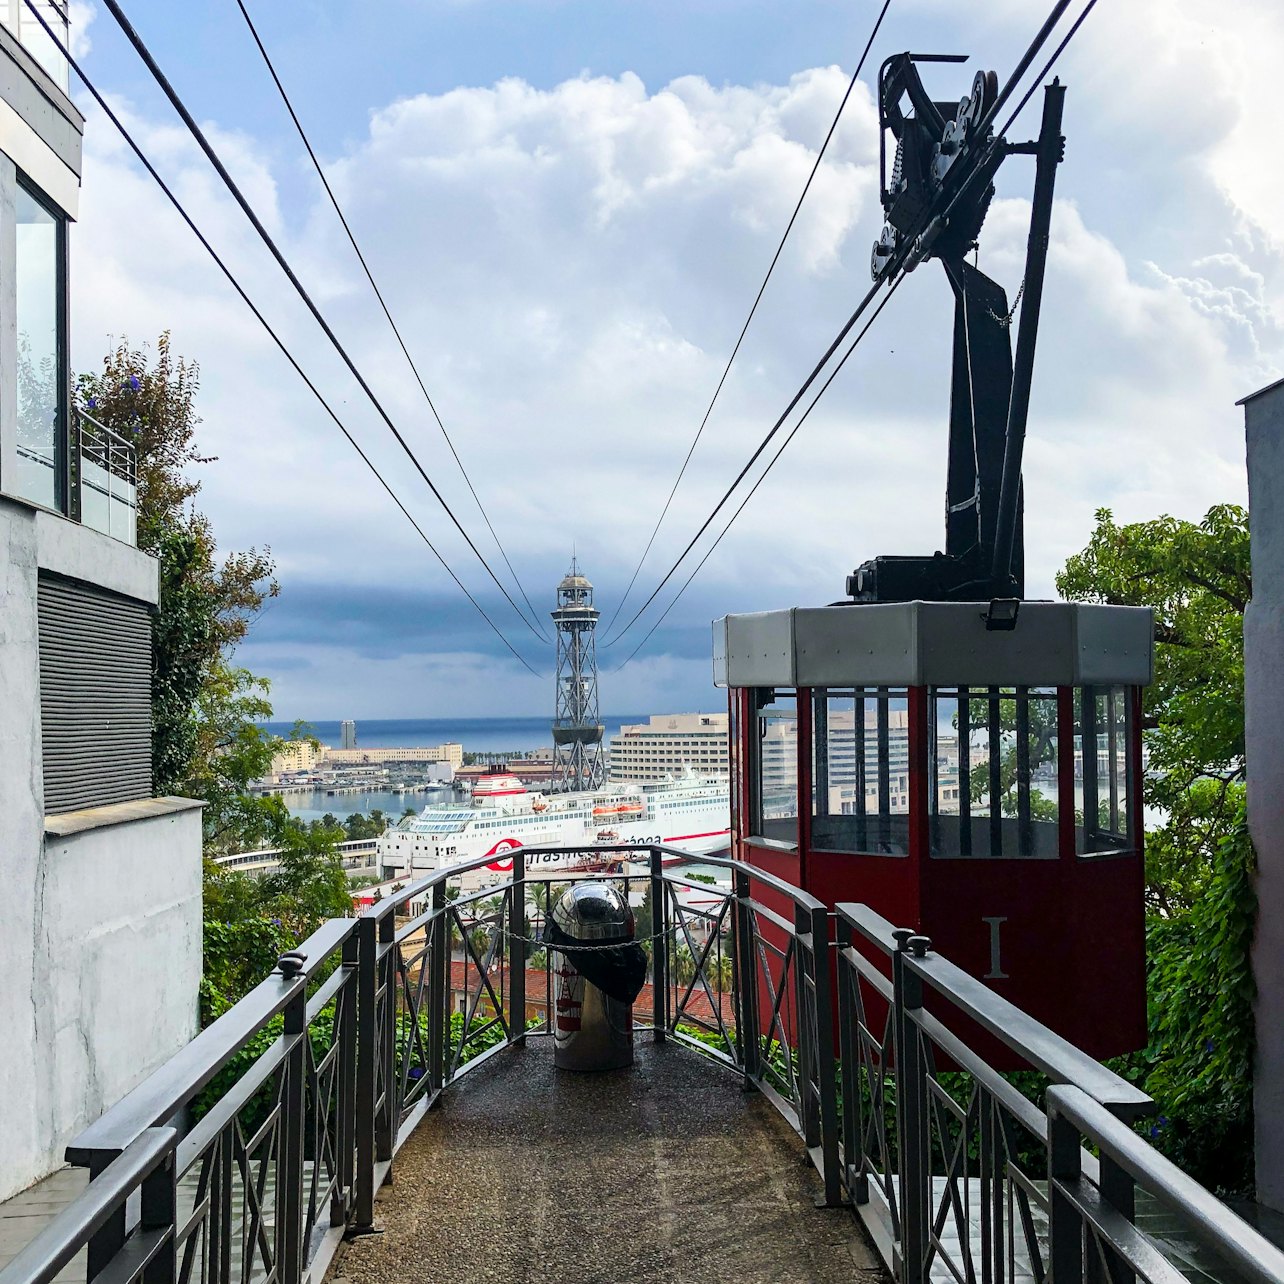 Barcelona Cable Car: One Way from Montjuic Mountain - Accommodations in Barcelona